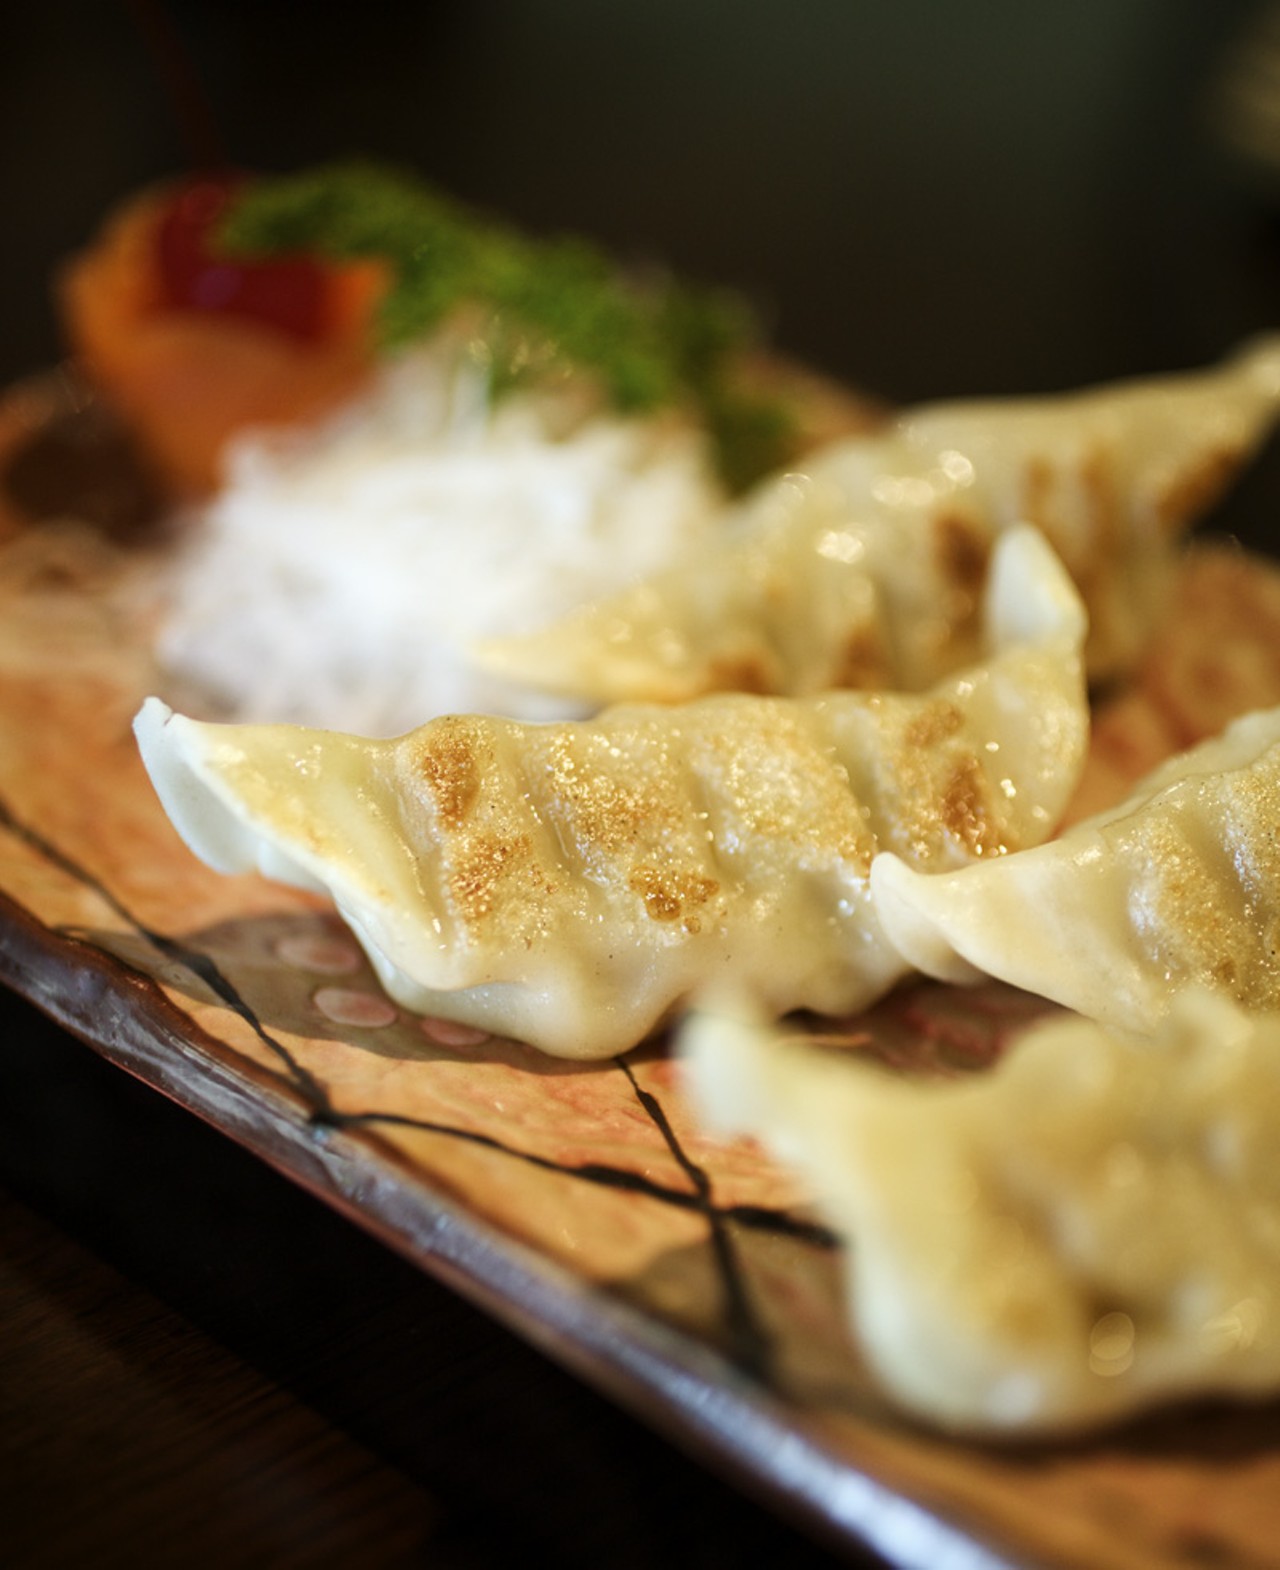 The Gyoza appetizer is a Japanese style pan-fried pot sticker made with pork.